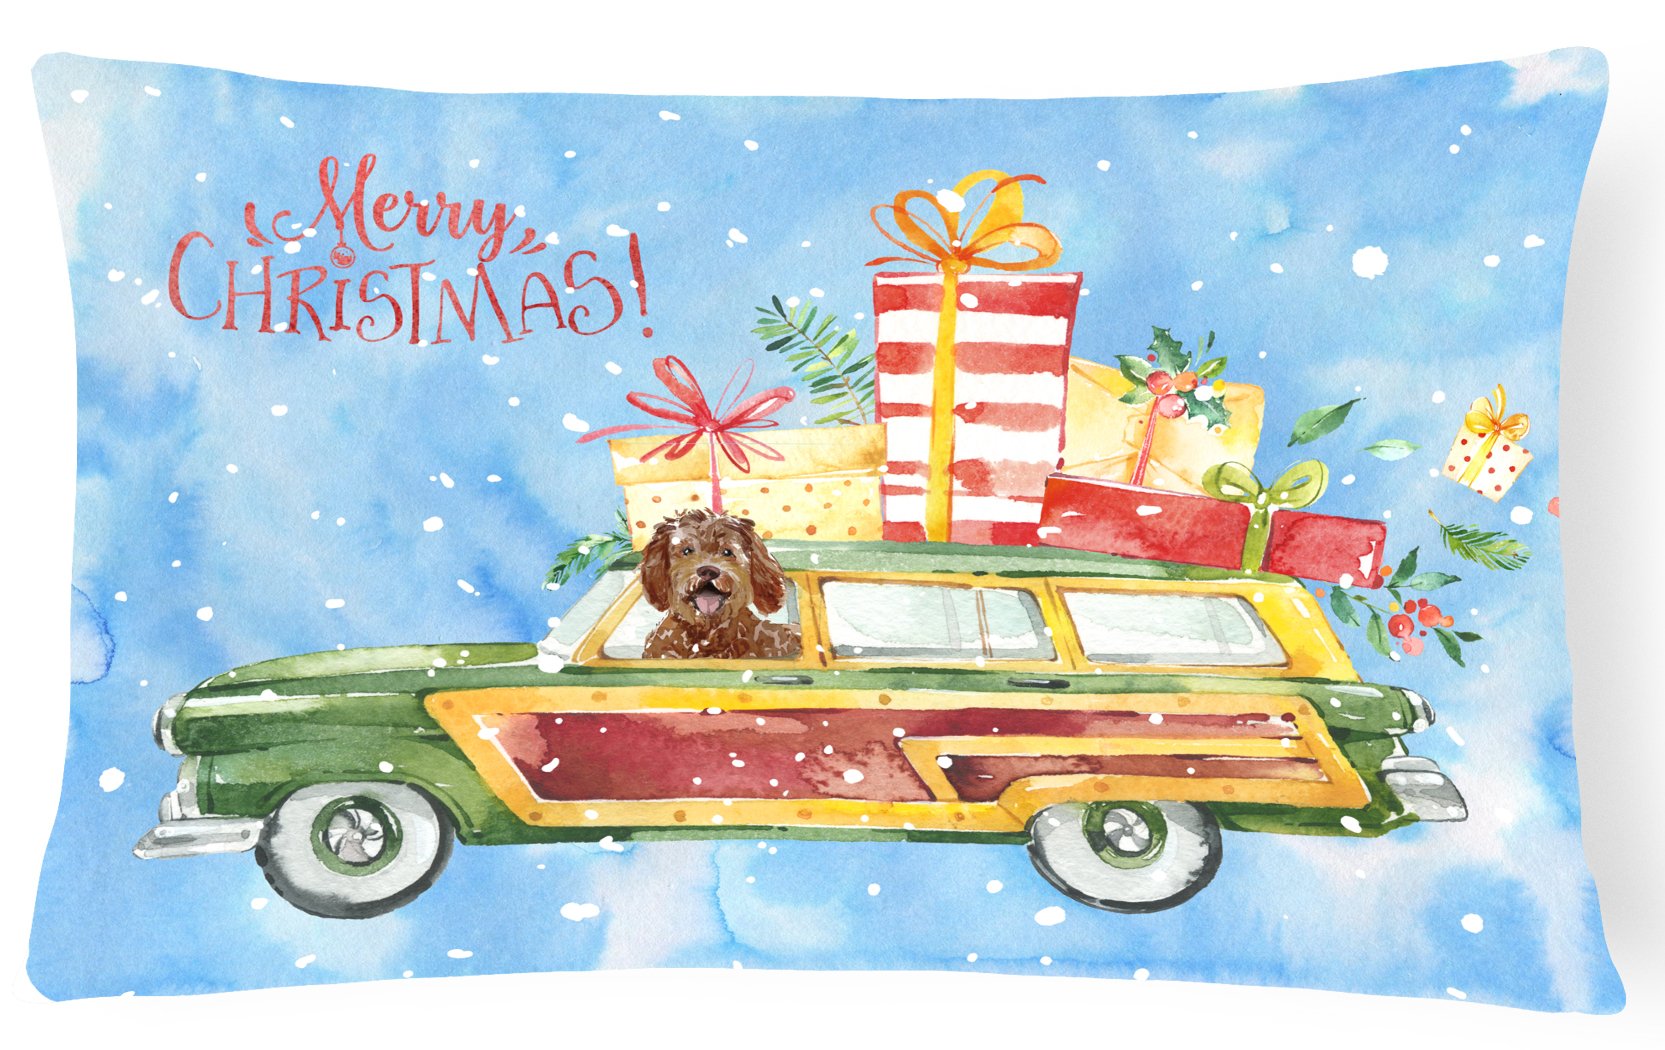 Merry Christmas Labradoodle Canvas Fabric Decorative Pillow CK2411PW1216 by Caroline's Treasures